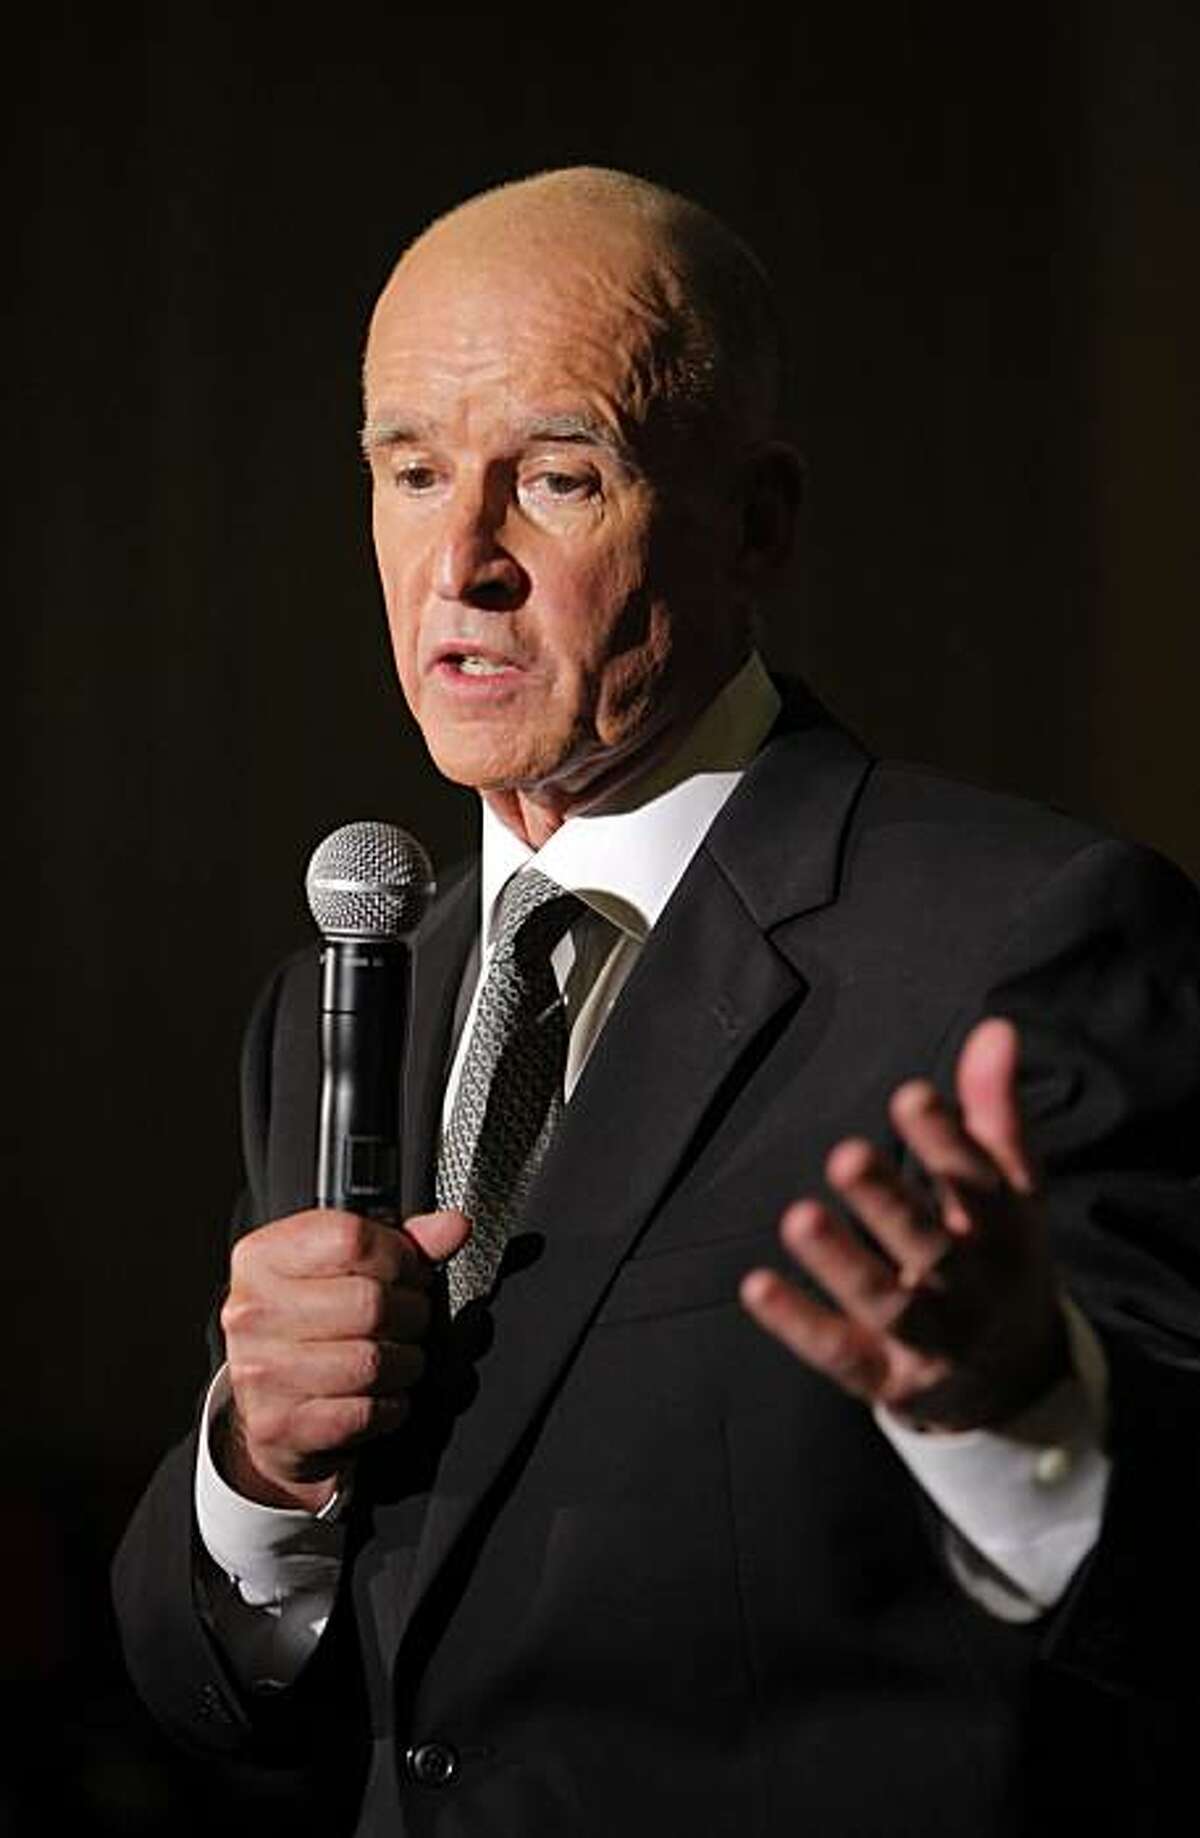 Gubernatorial candidate Jerry Brown addresses the press after he and his opponent, Med Whitman, faced off in a debate at Dominican University in San Rafael, Calif., on Tuesday, October 12, 2010.